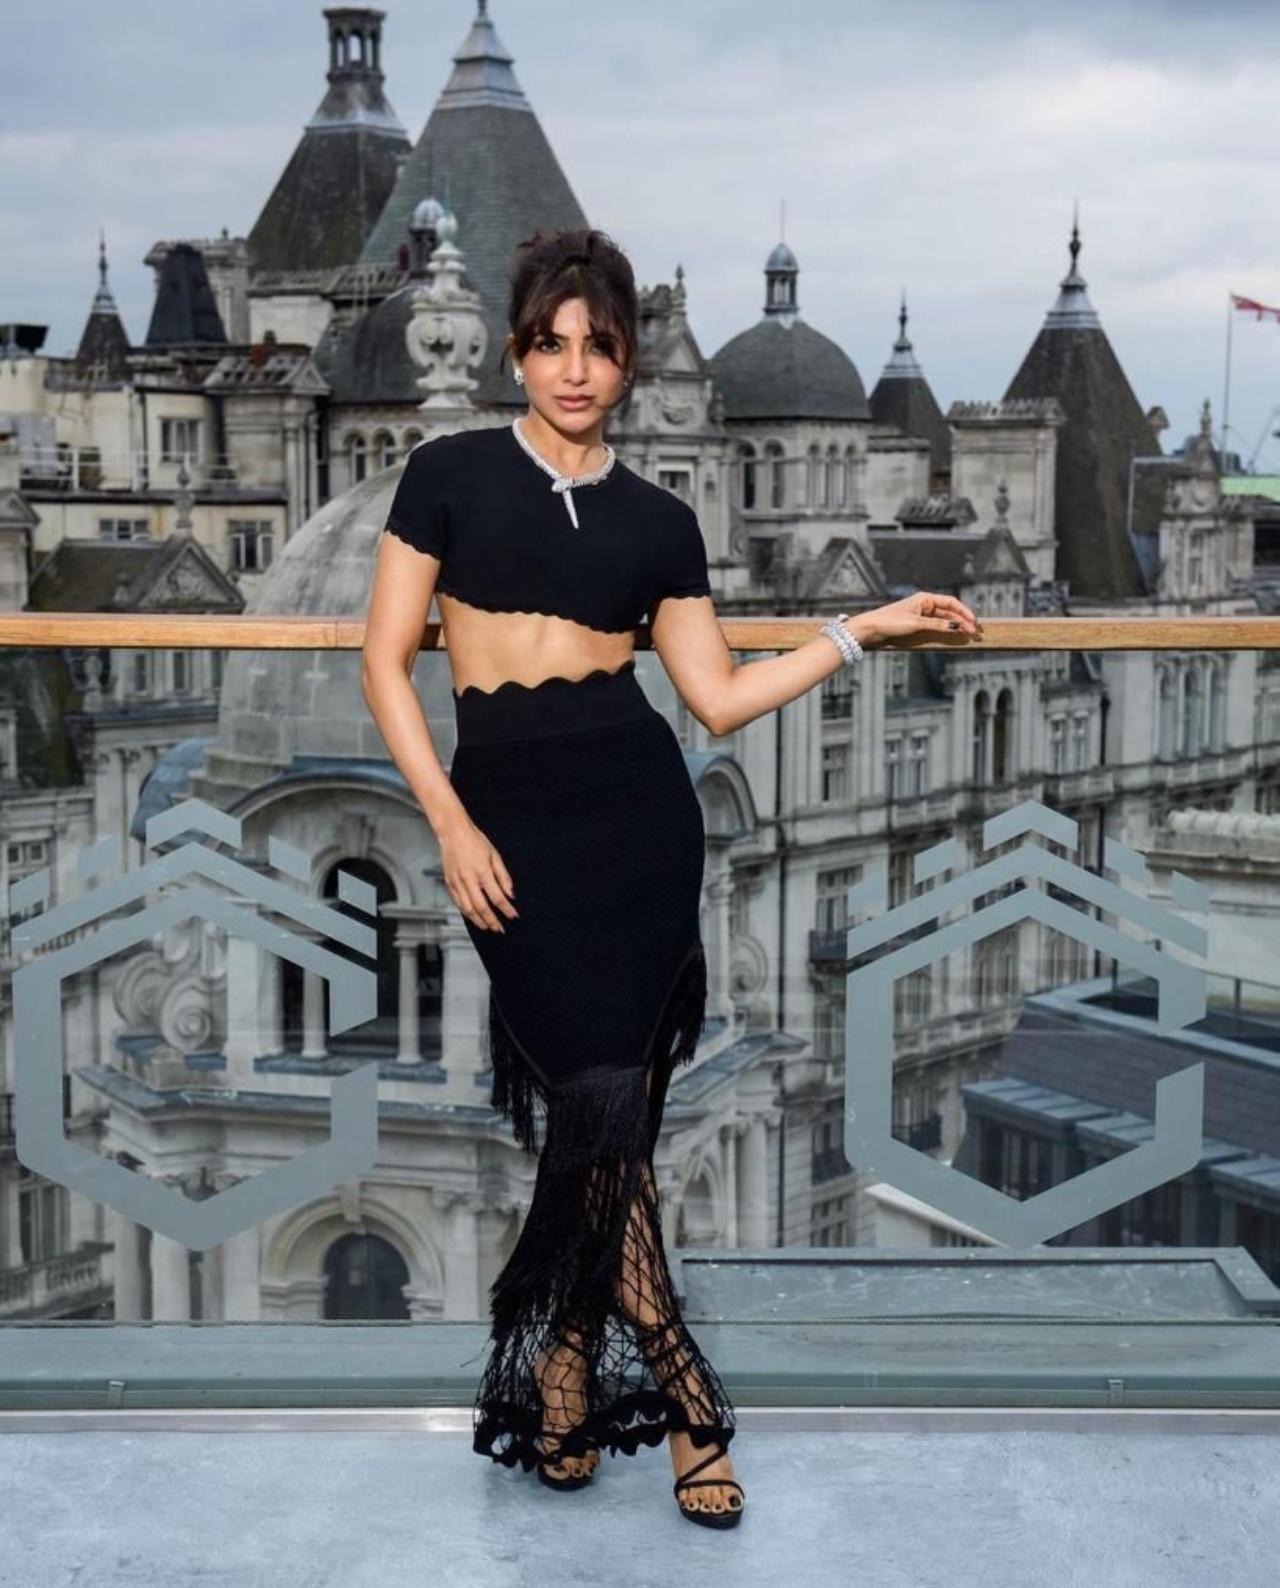 Samantha Ruth Prabhu attended the global premiere of Citadel in London and looked absolutely stylish and ravishing in her chic black ensemble.